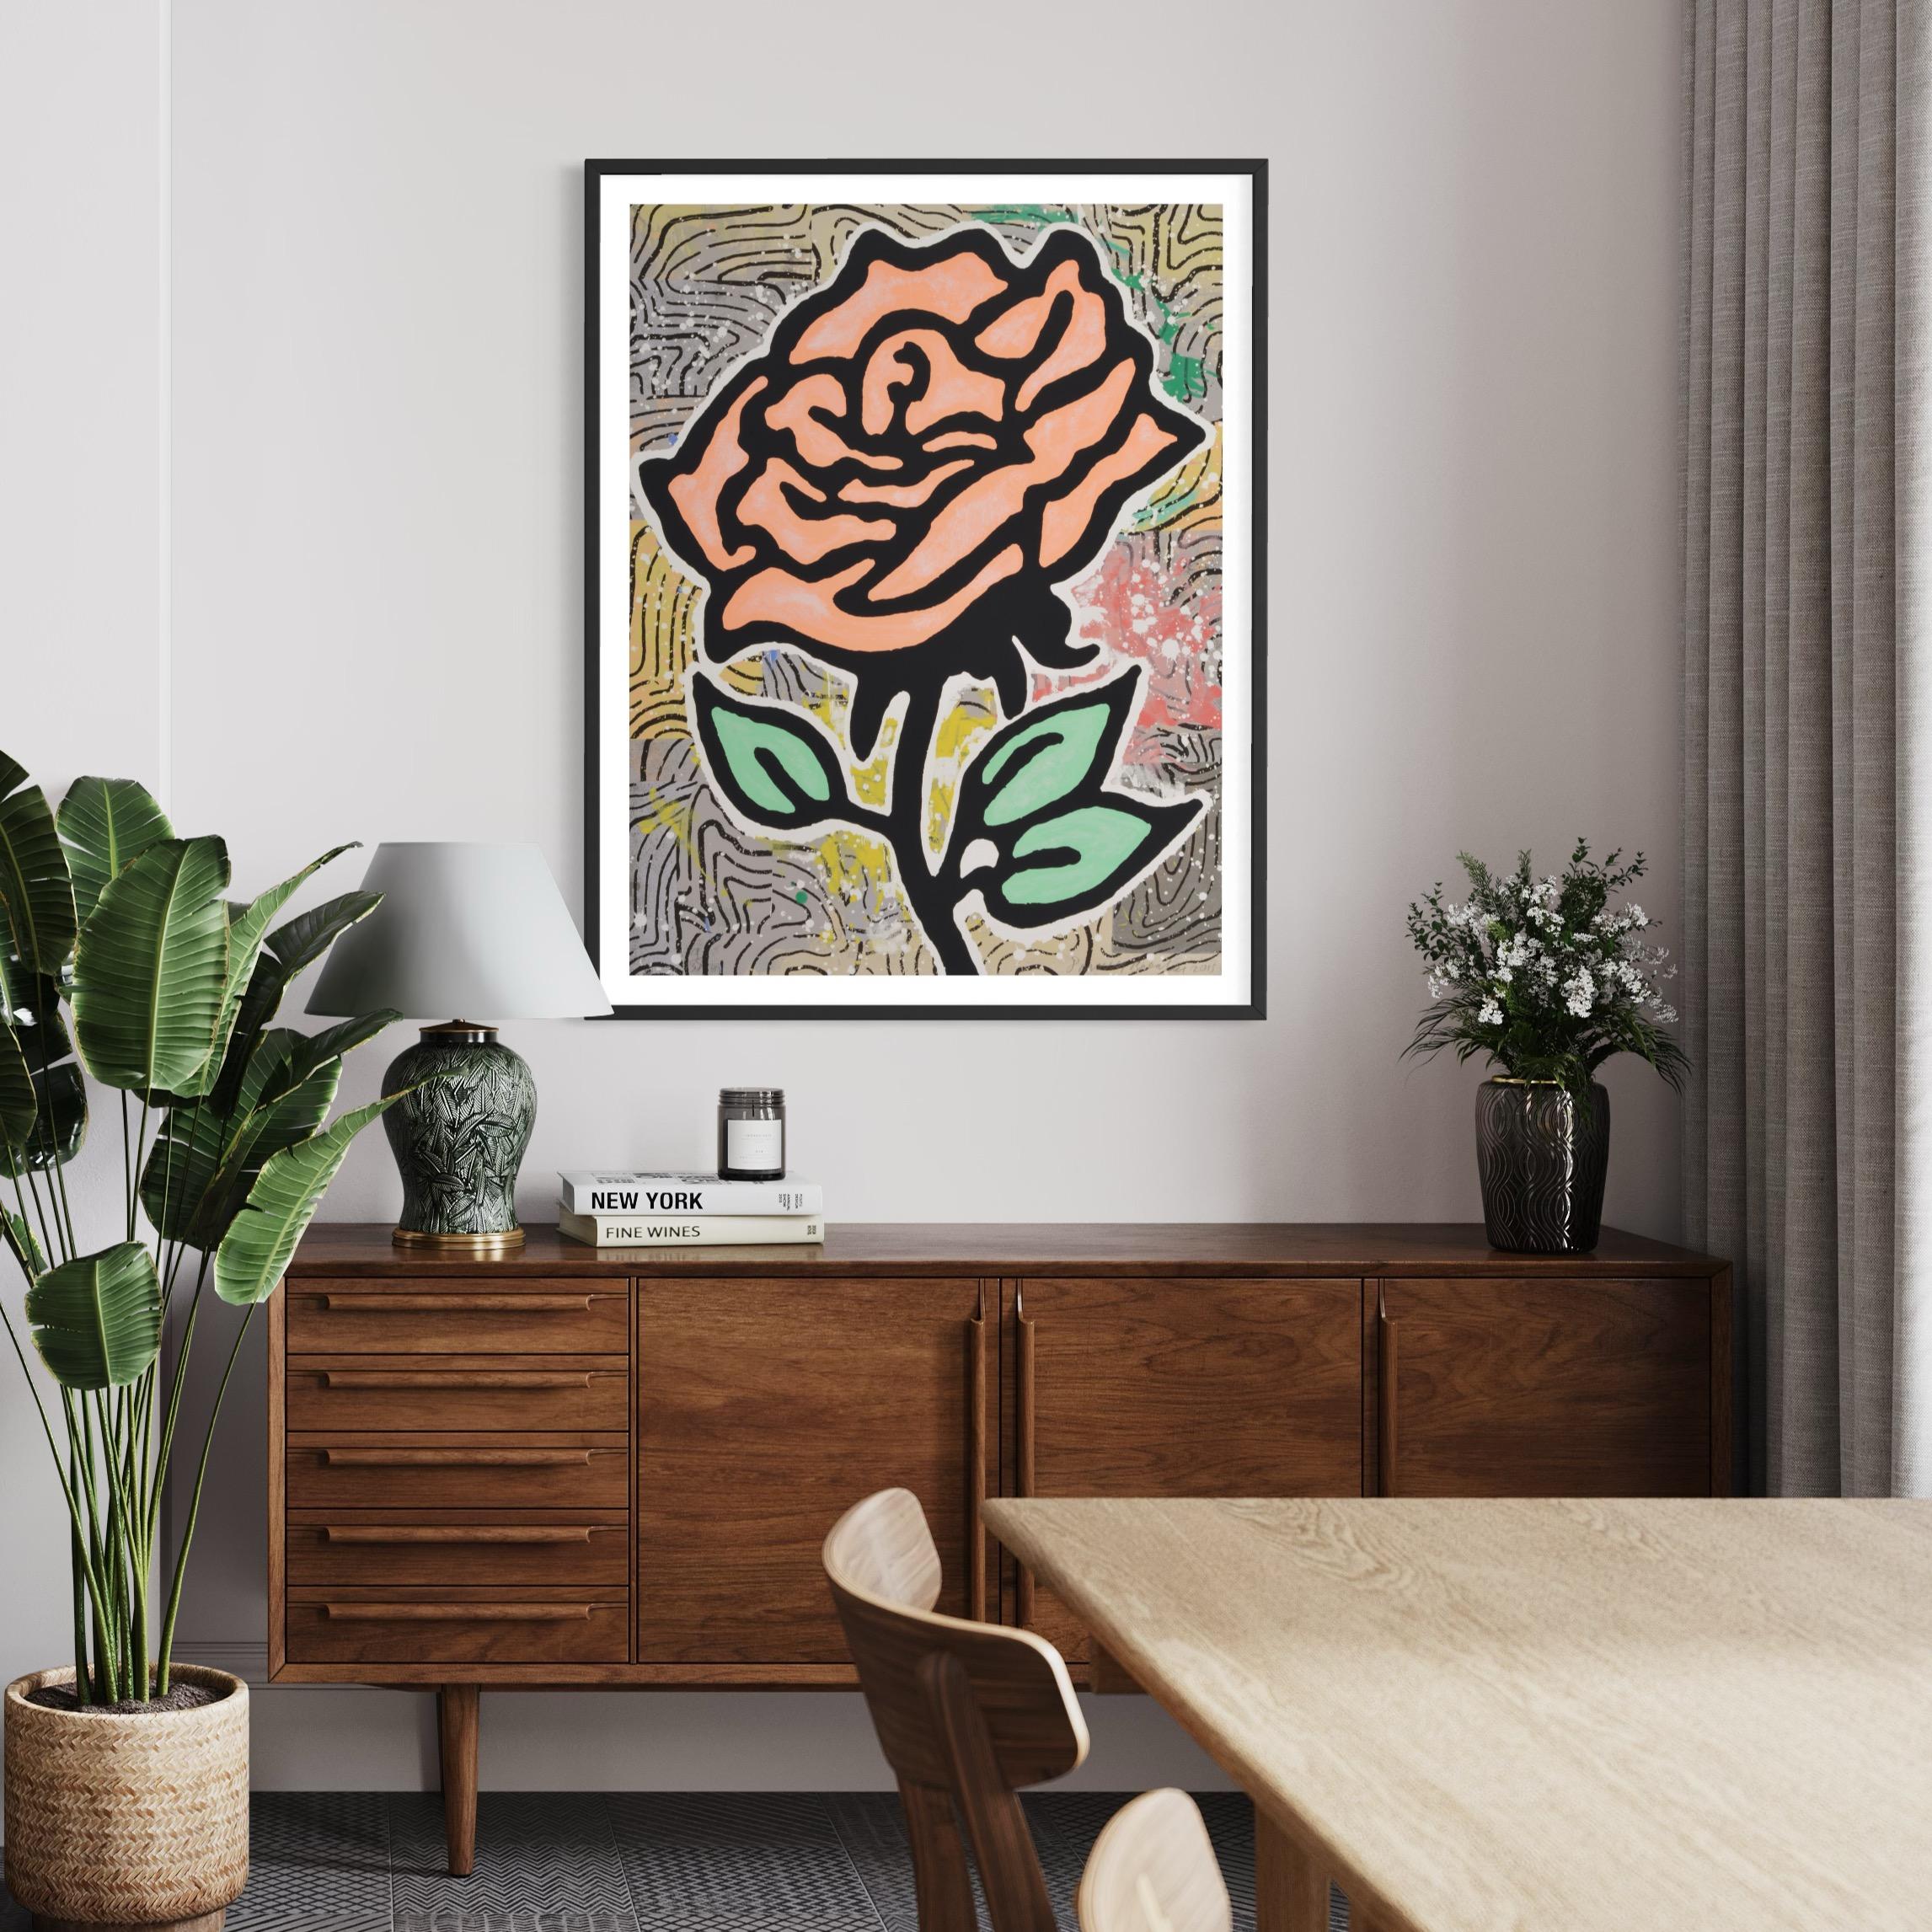 Donald Baechler
Orange Rose
2015
Silkscreen
101.6 × 78.1 cm
(40 × 30.7 in)
Signed and numbered
Edition of 35
In mint condition

PLEASE NOTE: Images of edition number are example references only.
The seller can only provide the specific edition